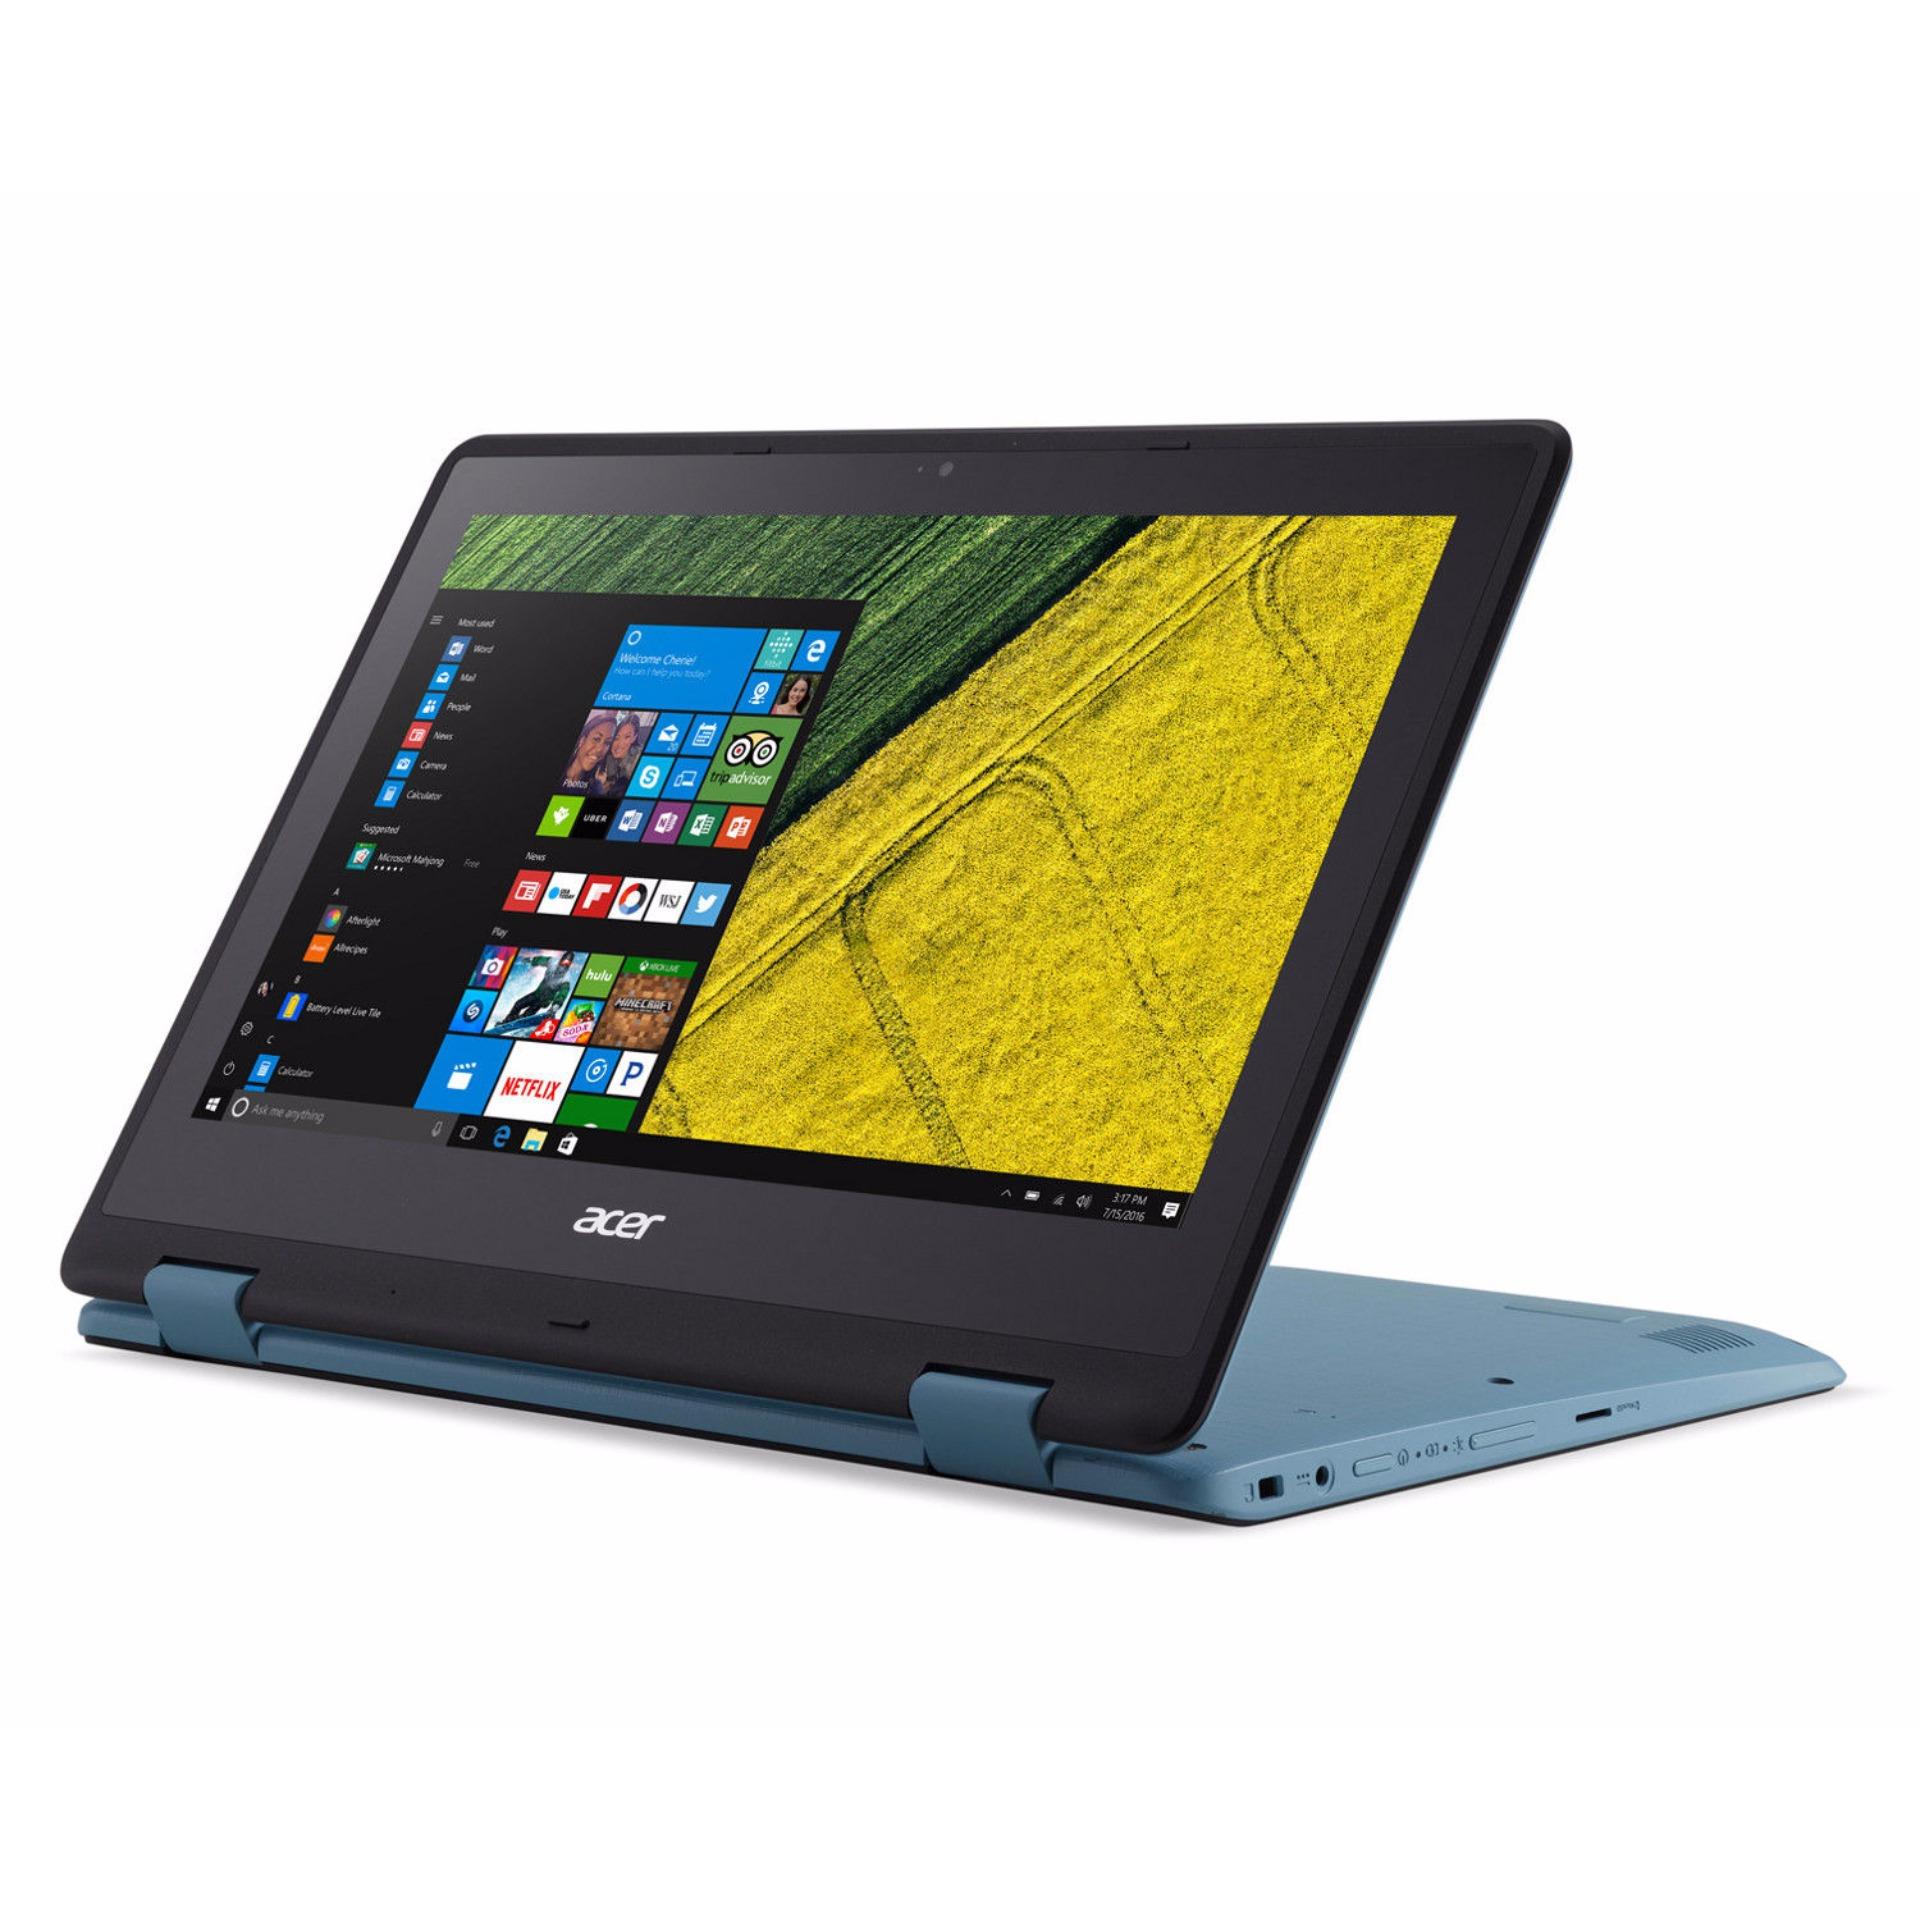 Acer Spin 1 sp111-32n. Ноутбук Acer Spin 13. Ноутбук Acer Spin 111-33. Spin sp111 33.